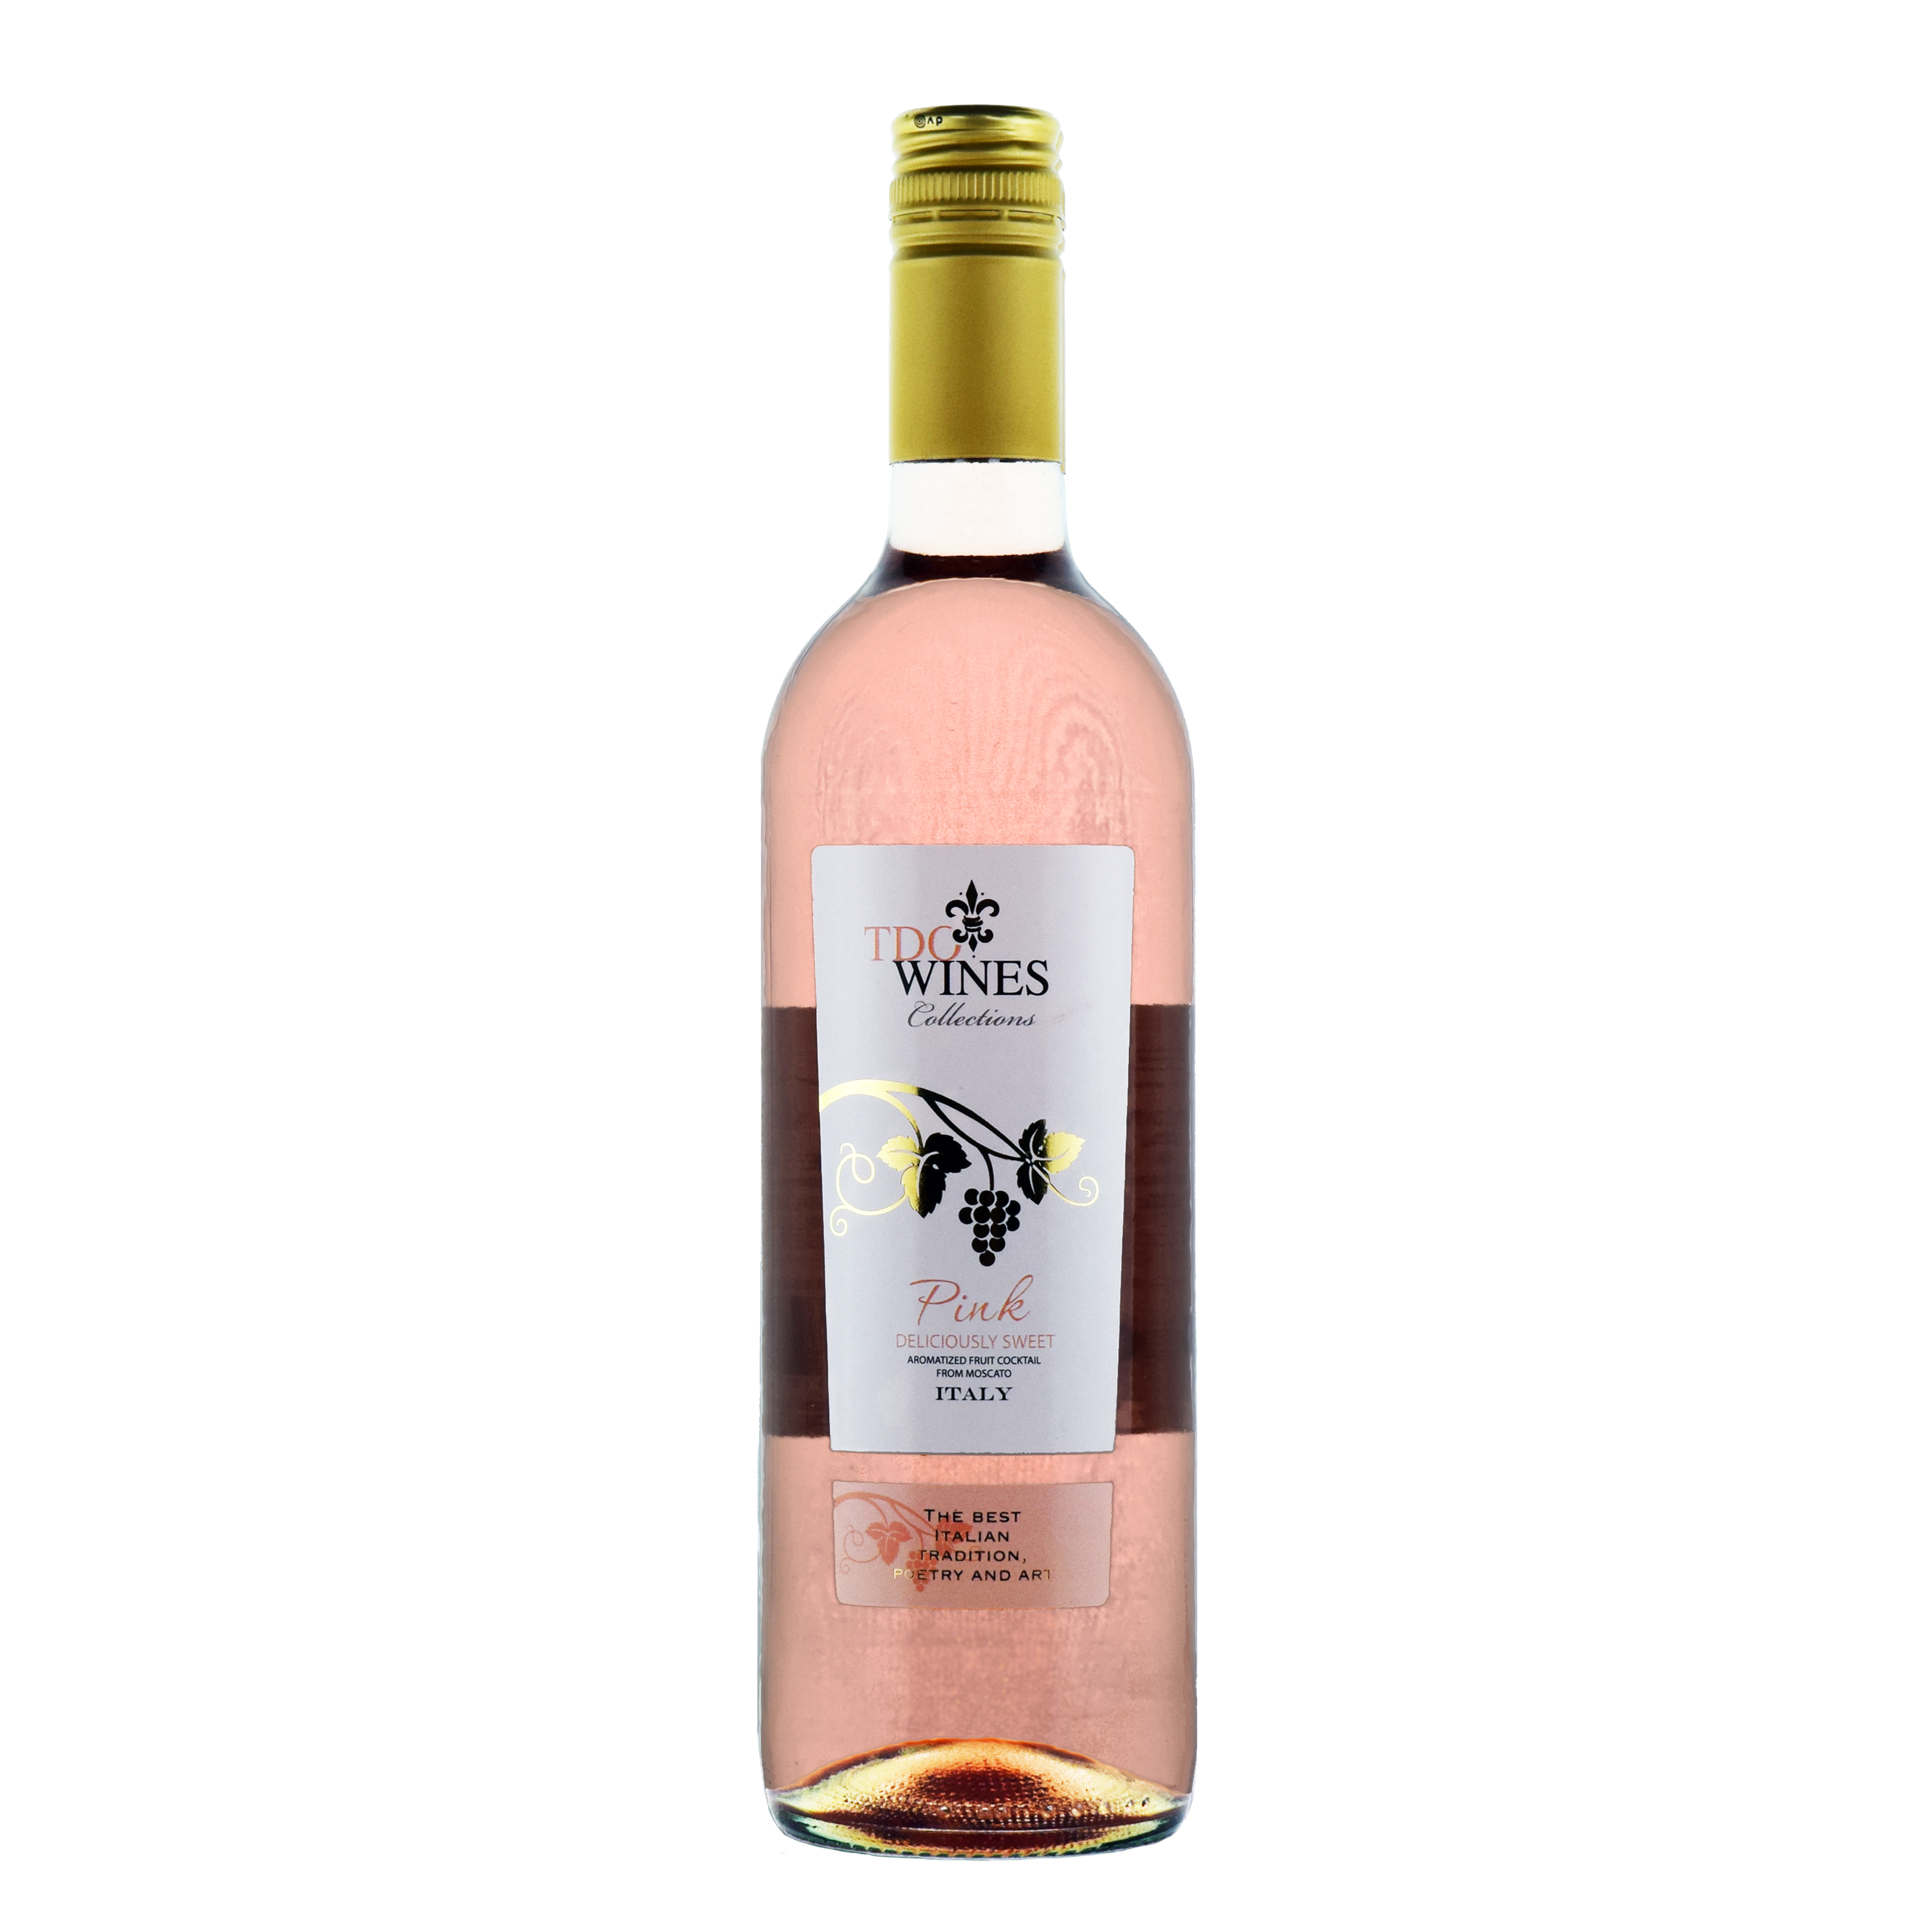 Tdo Pink Moscato 750ml 1 Case Arco Globus Wholesale Online,What Temperature To Bake Chicken Wings